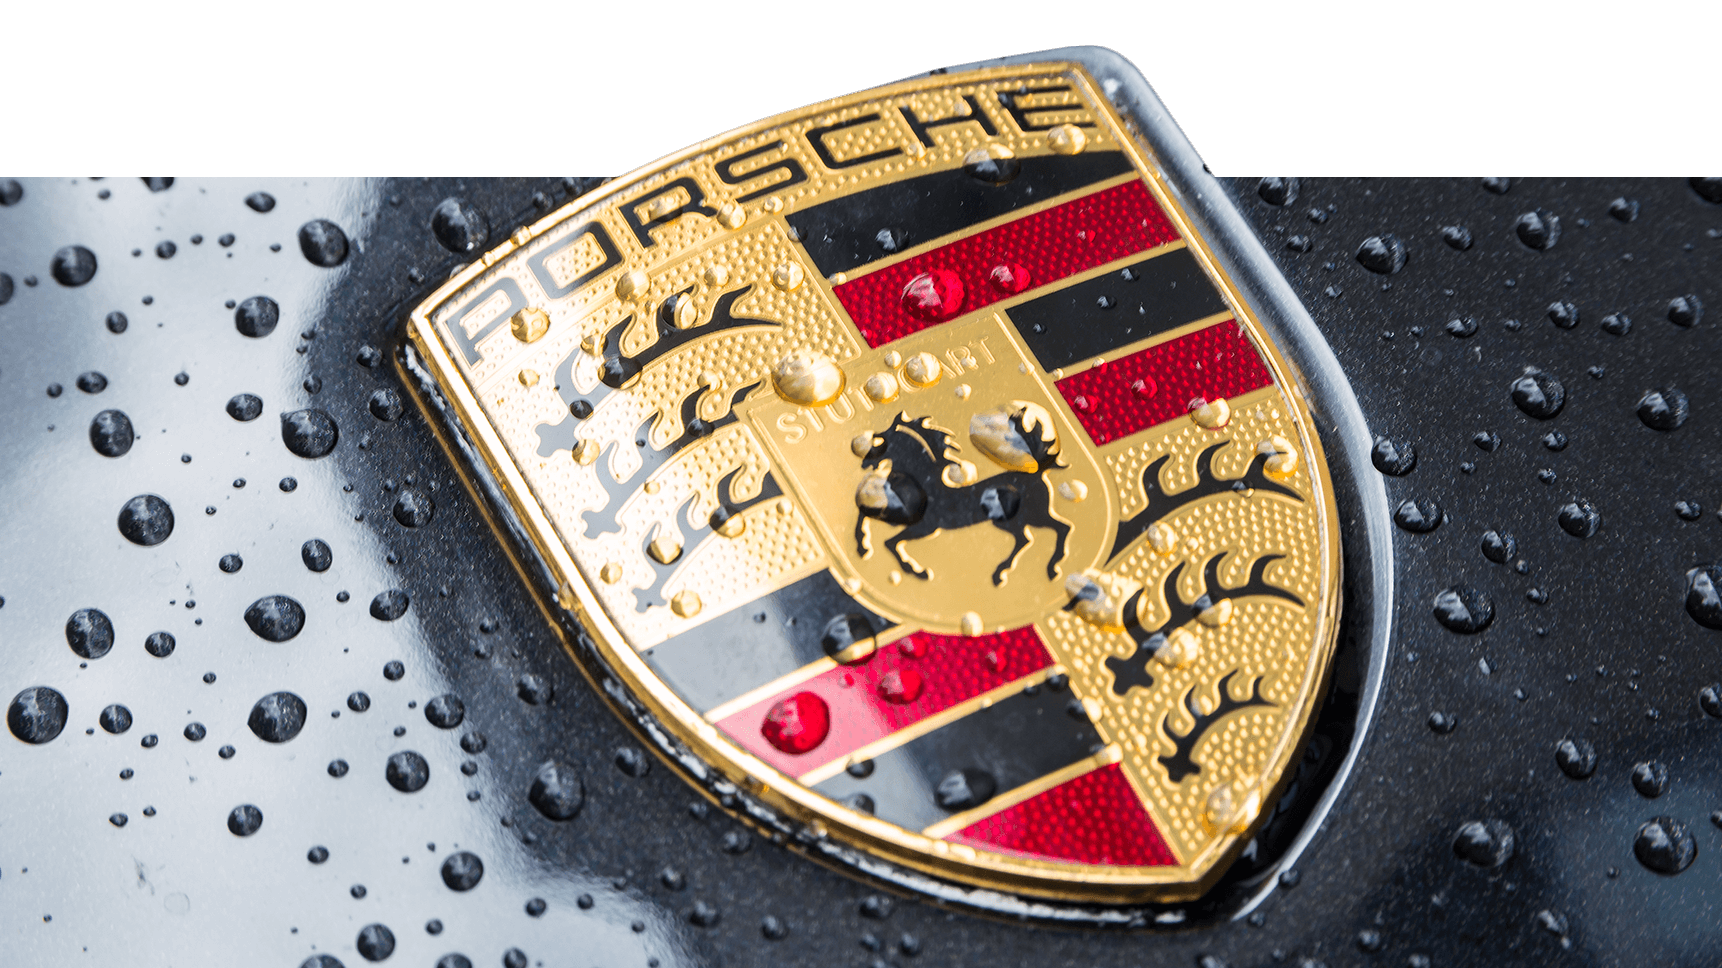 Porsche stays ahead with technology with Porsche Innovation Labs.